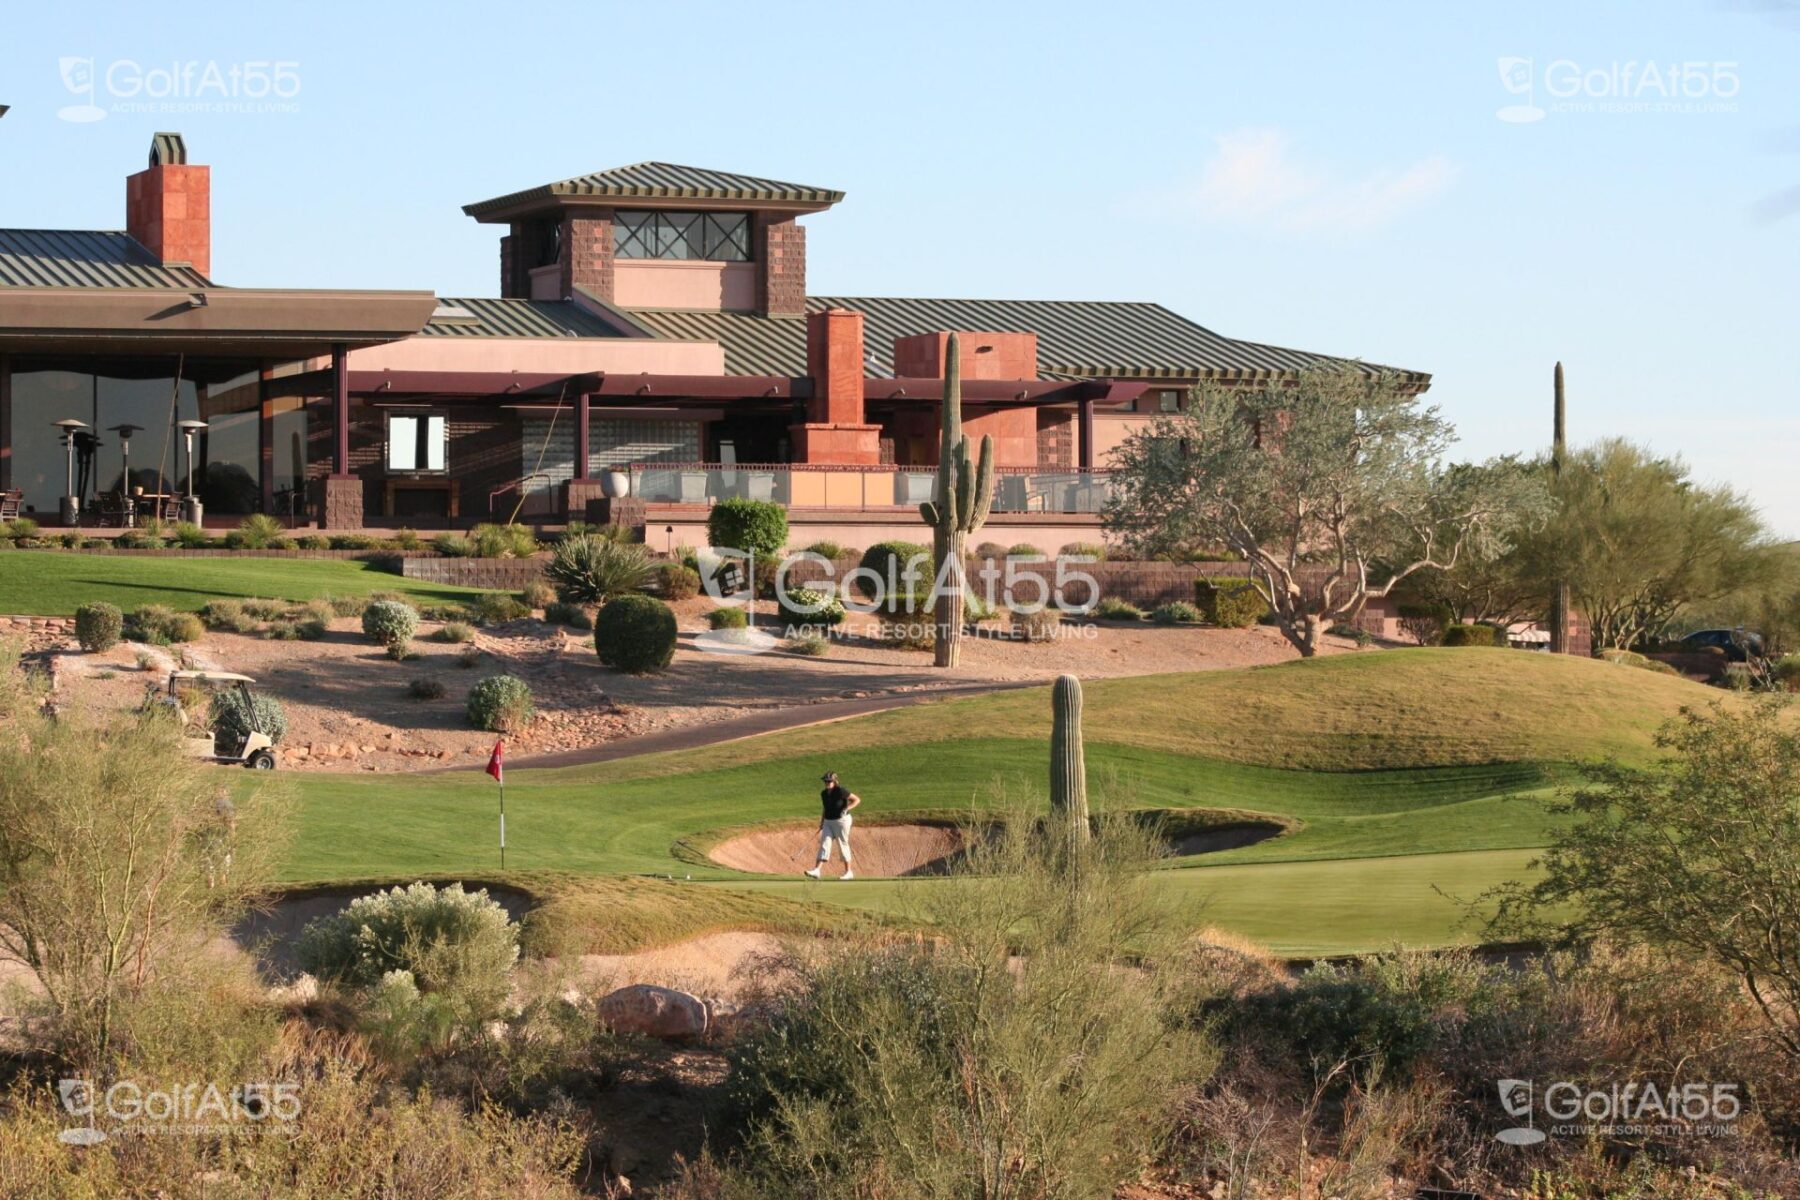 Persimmon Clubhouse